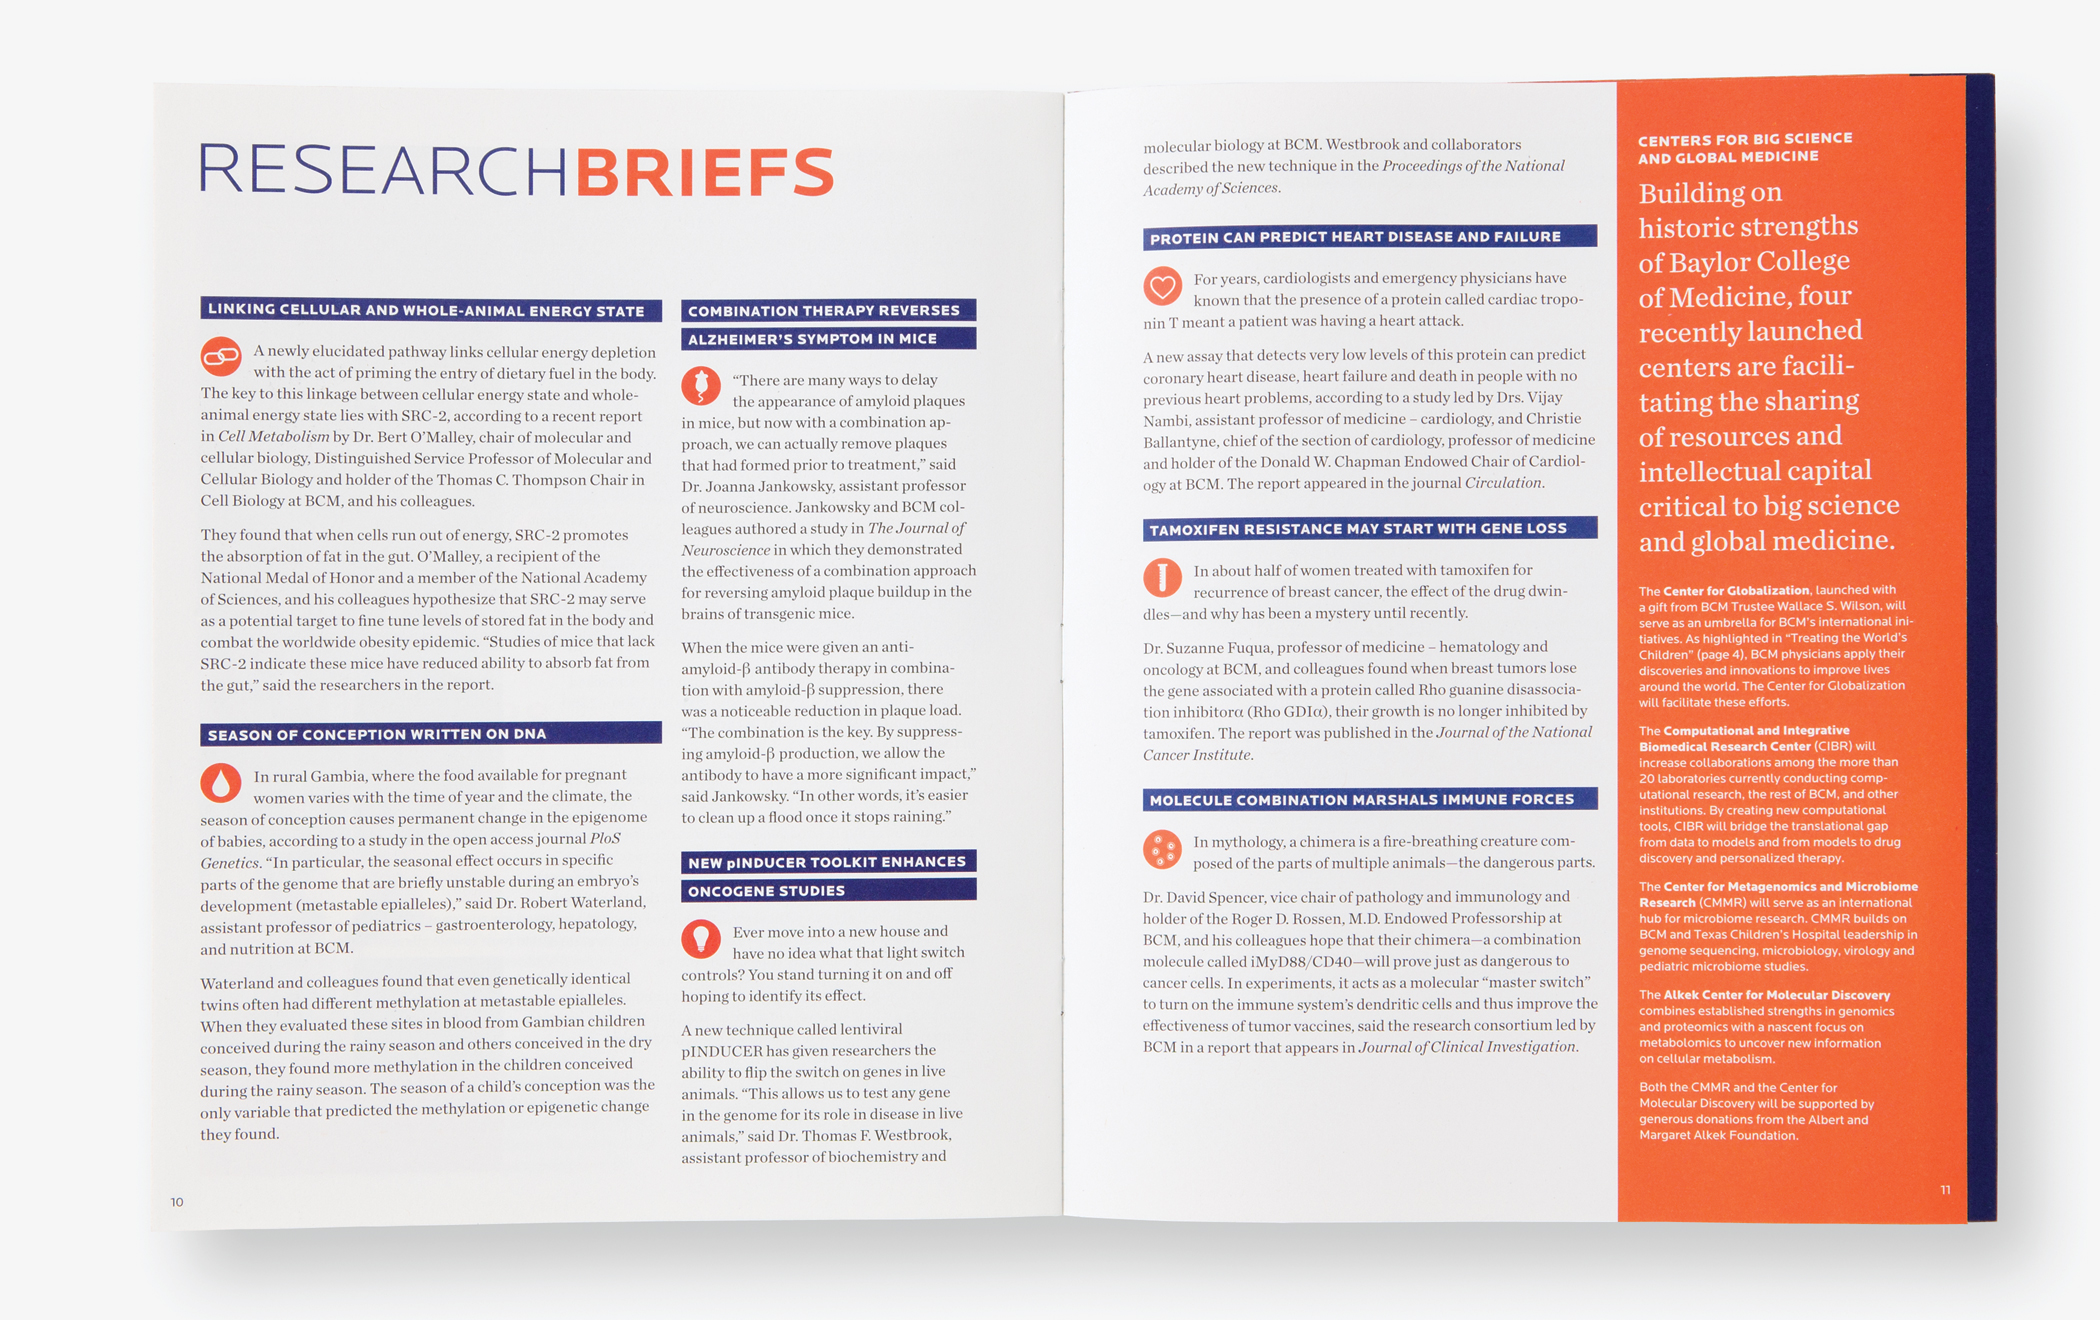 Pages from BCM Quarterly report with the title "Research Briefs," listing several case studies.